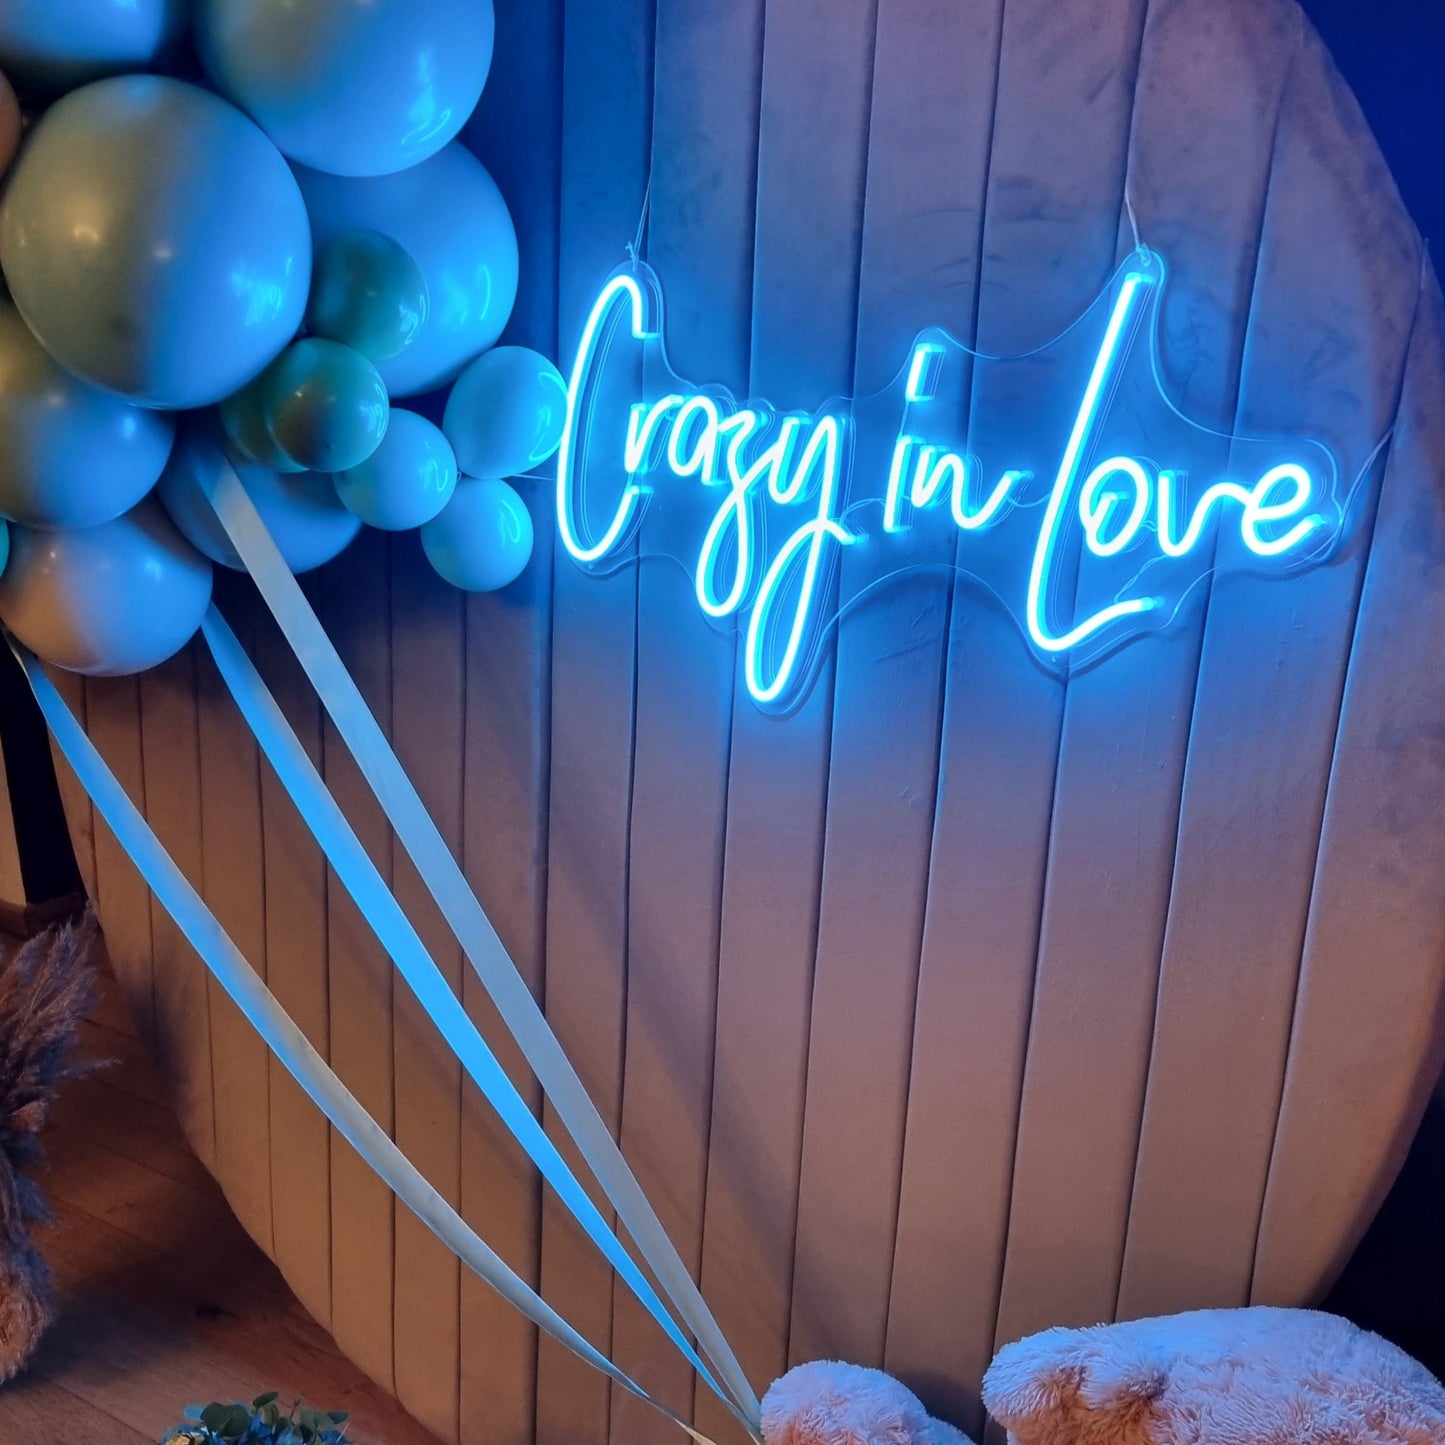 
                  
                    Illuminated neon sign | Crazy in love - Rgb - With remote control
                  
                